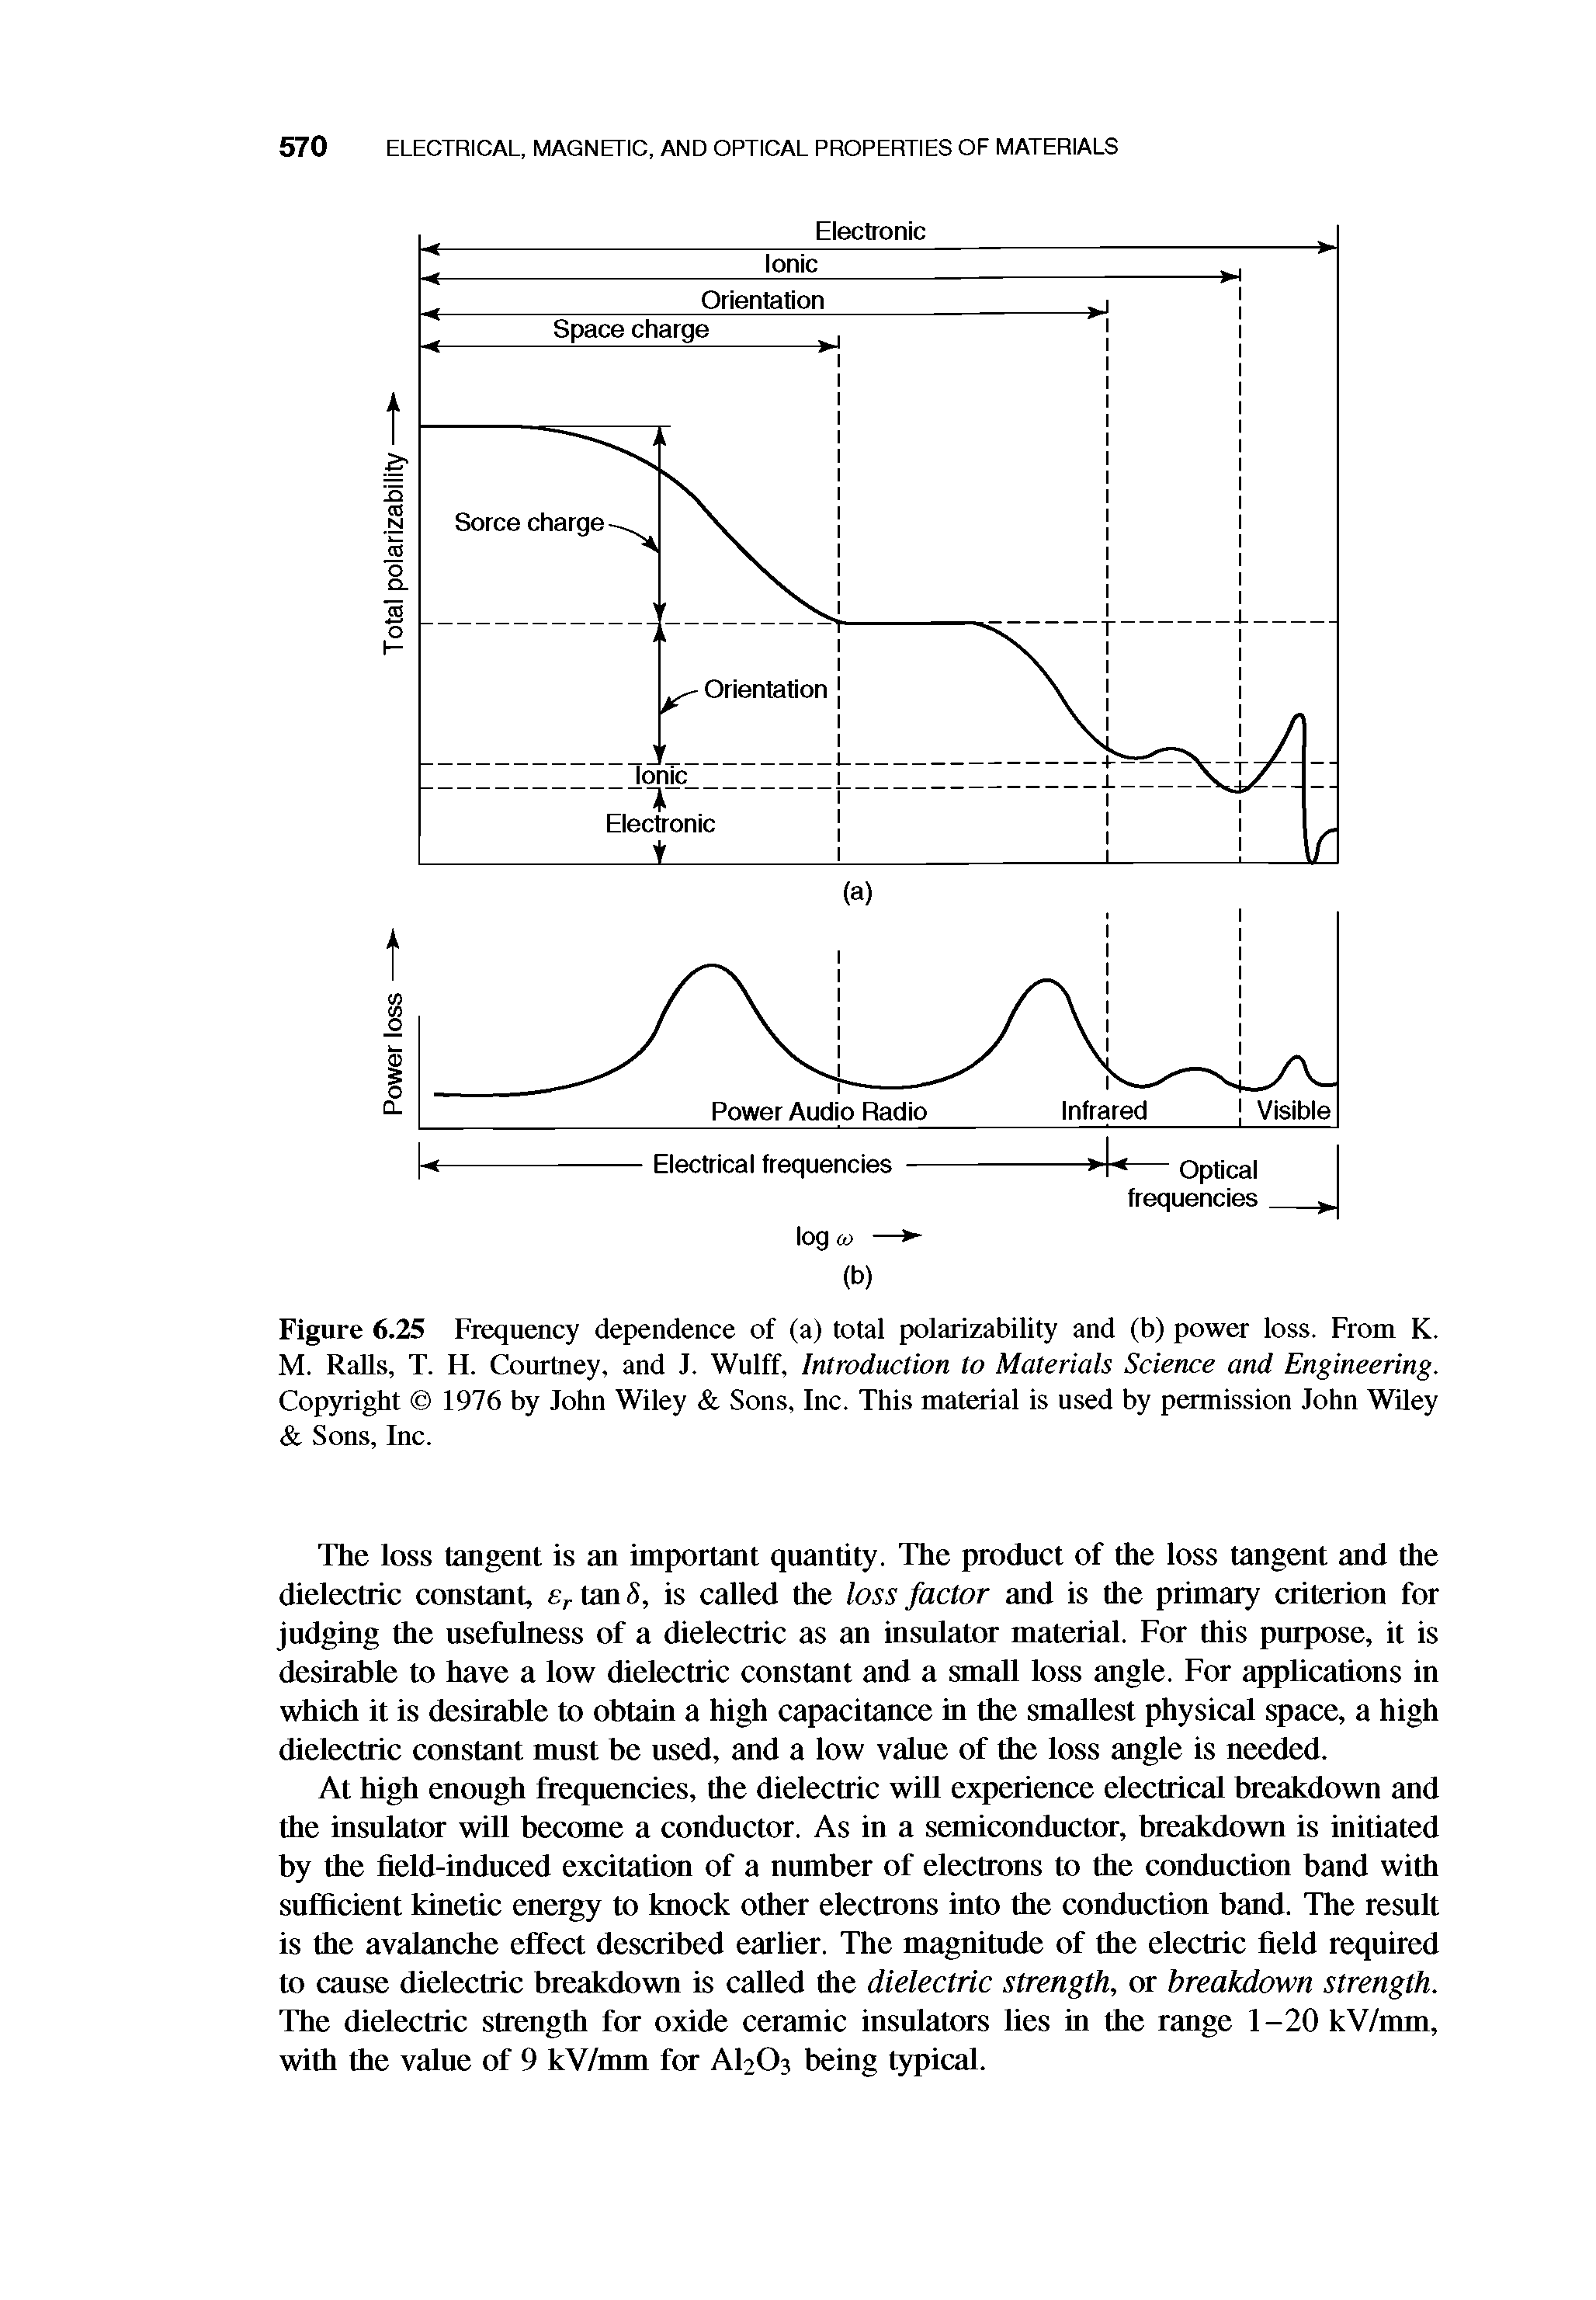 Figure 6.25 Frequency dependence of (a) total polarizability and (b) power loss. From K. M. RaUs, T. FI. Conrtney, and J. Wulff, Introduction to Materials Science and Engineering. Copyright 1976 by John Wiley Sons, Inc. This material is used by permission John Whey Sons, Inc.